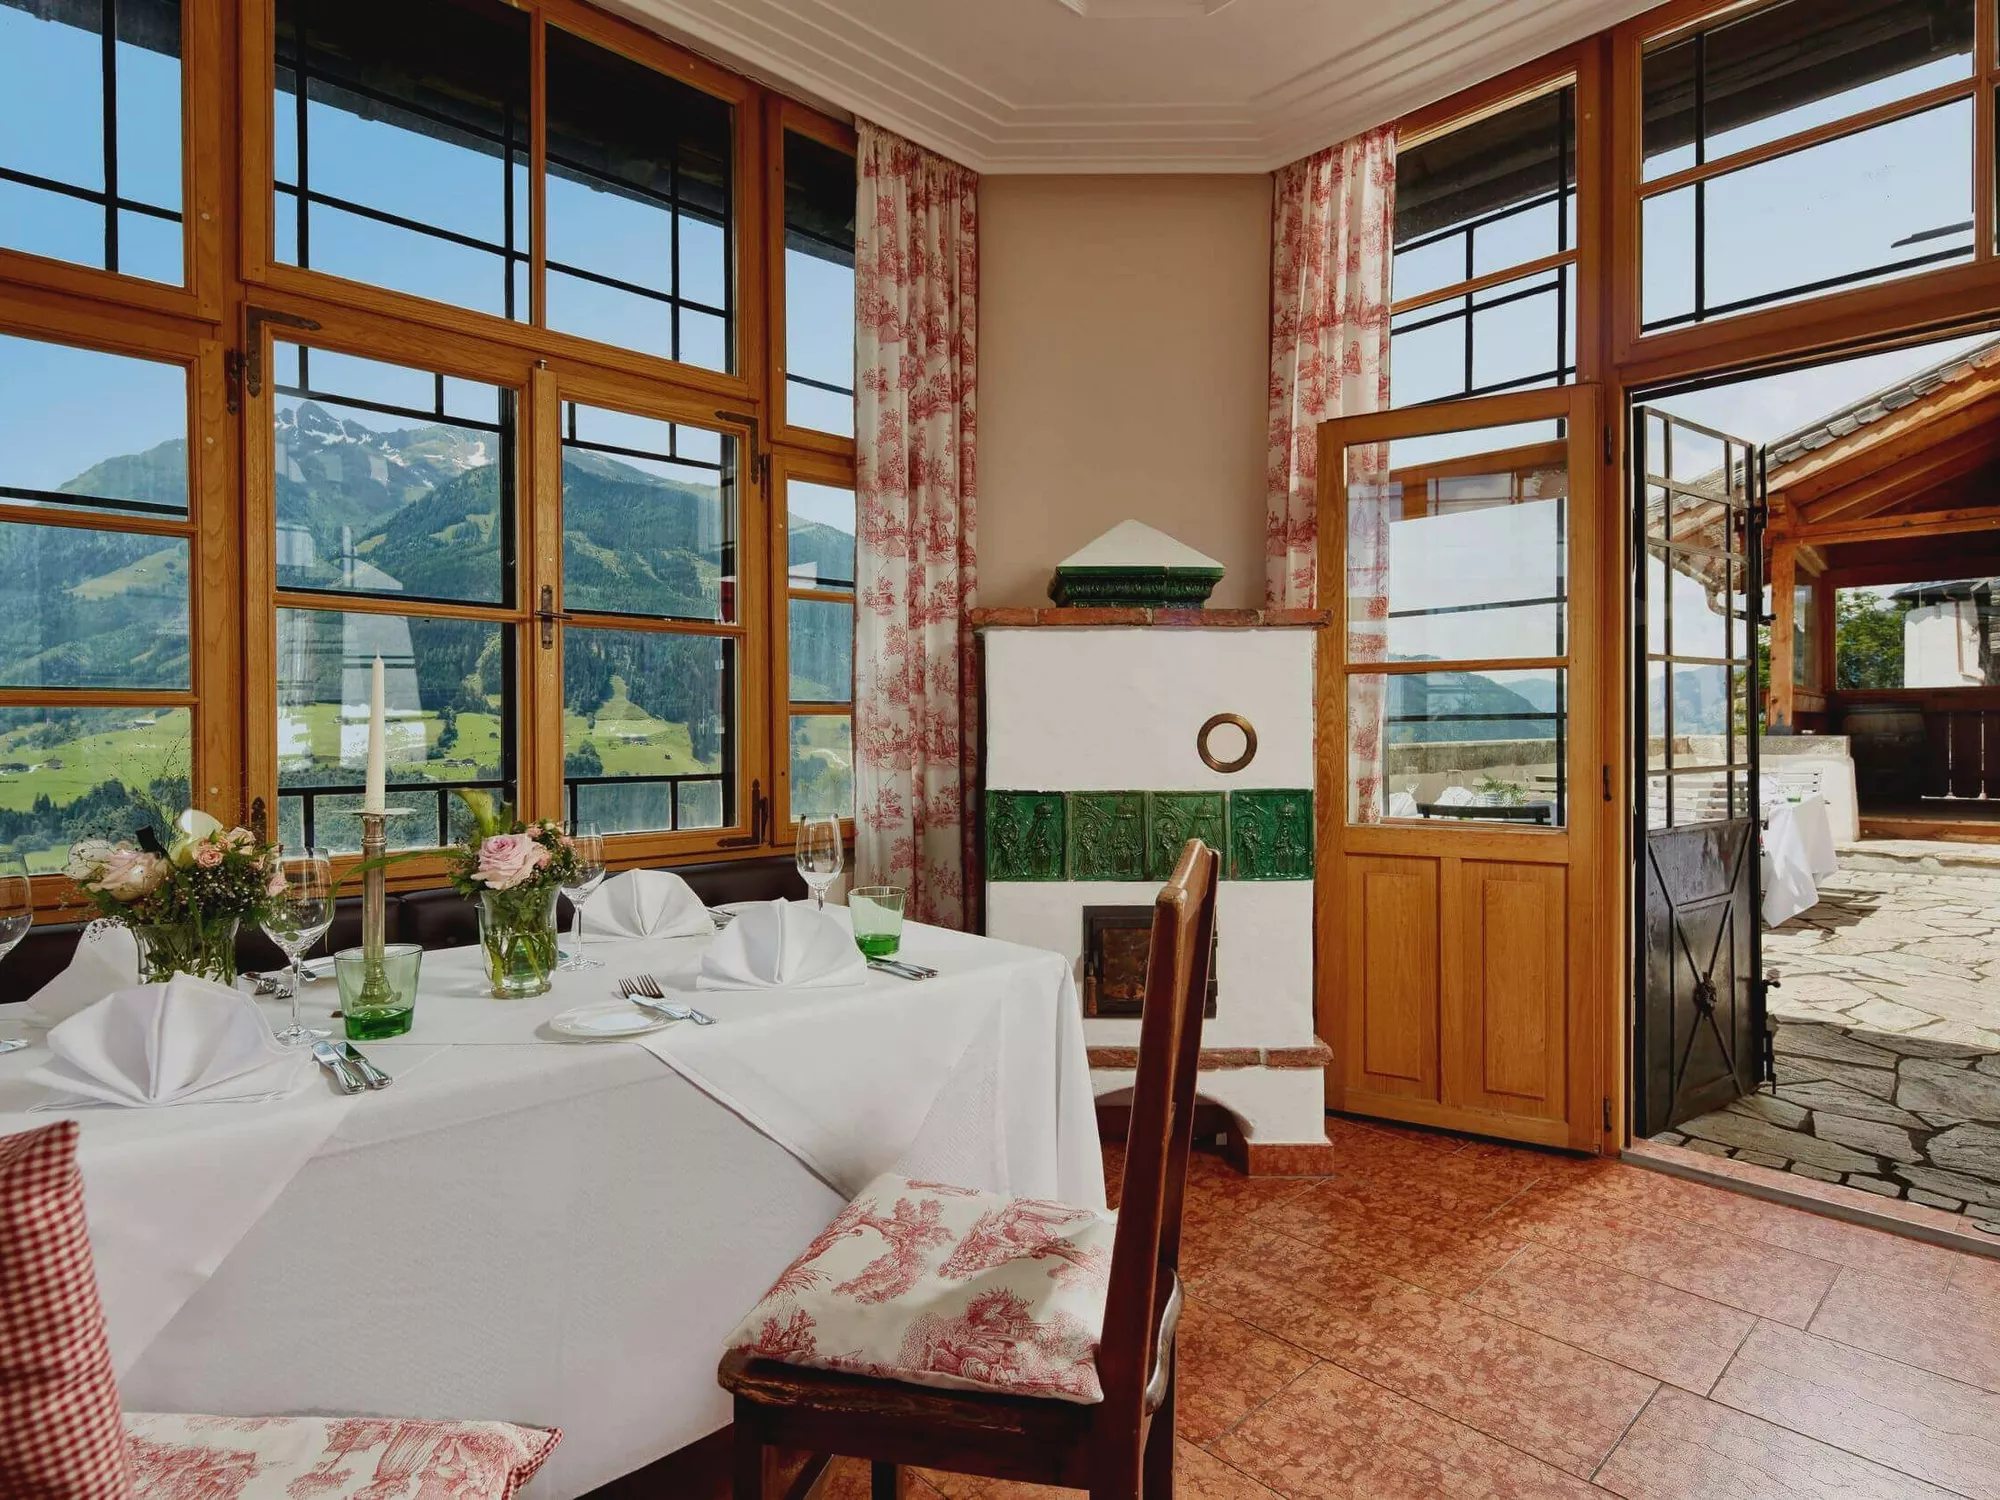 Set tables at Restaurant Schloss Mittersill with a view through large windows overlooking the surrounding mountains